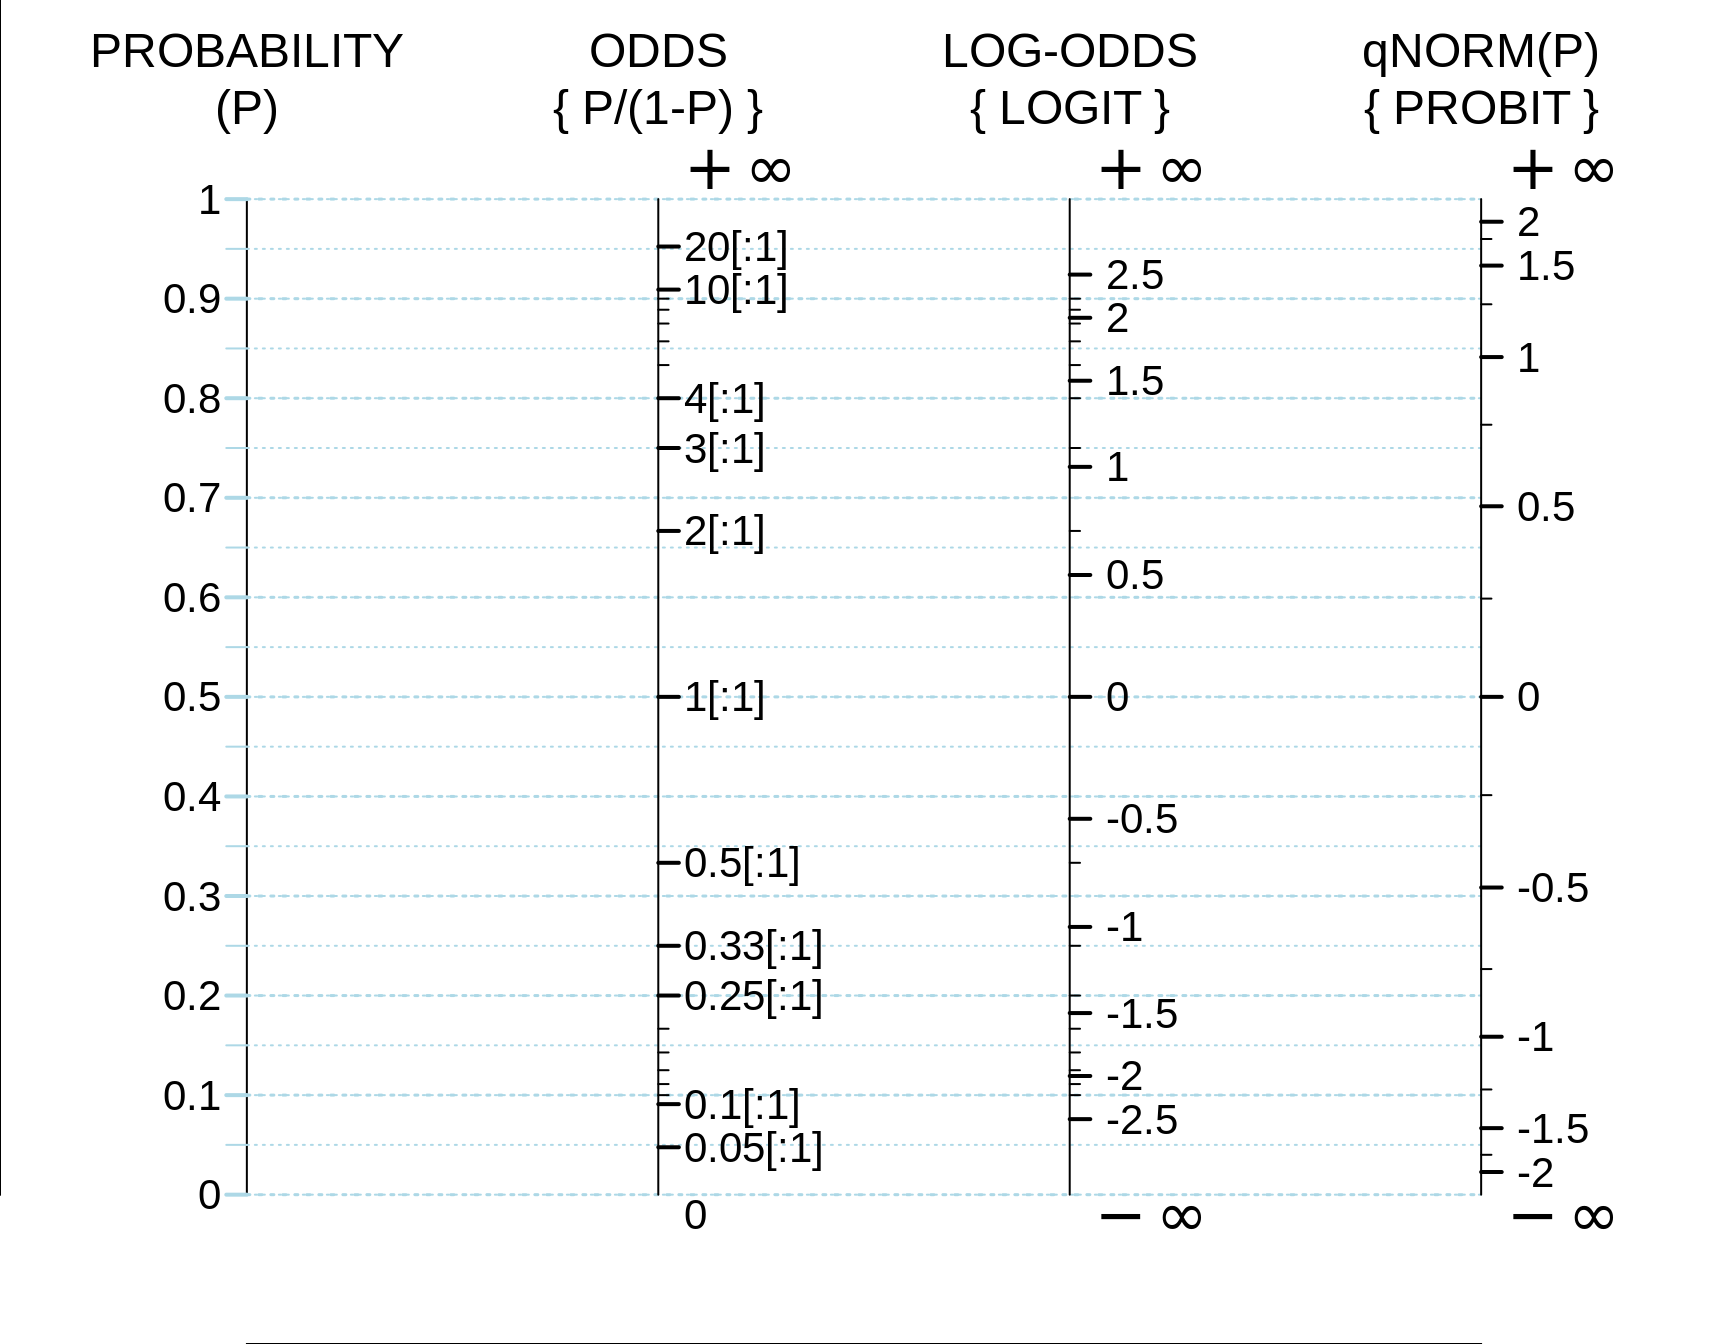 The probability scale, along with 3 equivalent scales derived from it. The probit scale transforms P into a Z score: thus P = 0.025 becomes Z = -1.96, and P = 0.975 becomes Z = +1.96; to reverse direction, if Z = qnorm(P), then P = pnorm(Z). To convert a LOGIT back to an odds, ODDS = anti-log(LOGIT) = exp(LOGIT), and to convert an odds back to a probability,  P = ODDS/(1+ODDS).